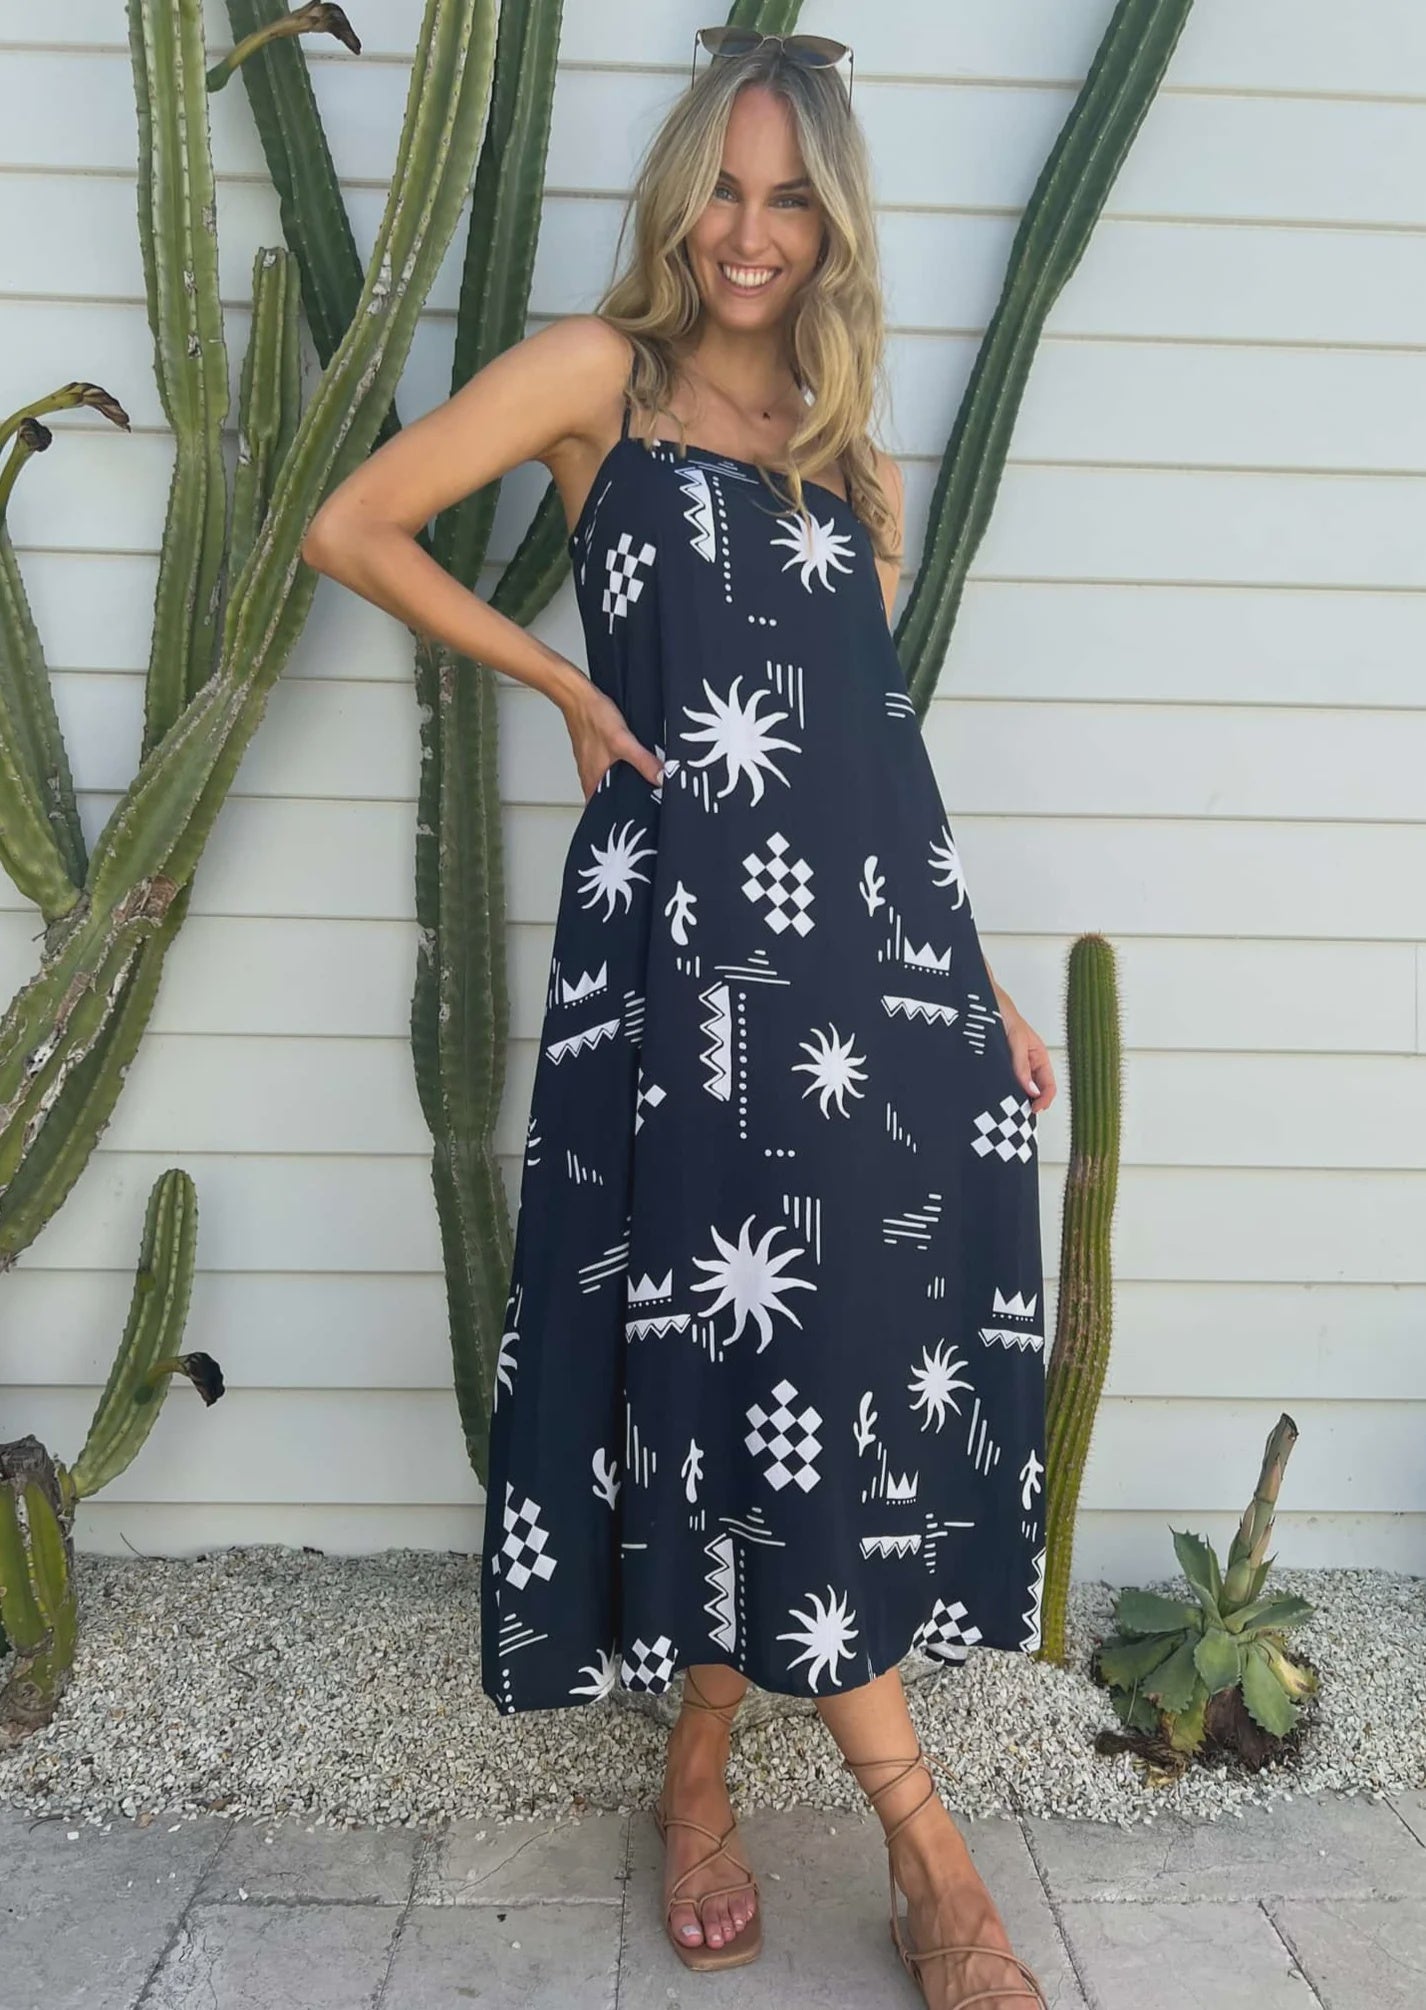 The Celia Maxi Dress boasts a playful square neckline and adjustable spaghetti straps for a perfect fit. It also features convenient pockets and a rouched back for added comfort. Stay effortlessly stylish in this Sol Navy Print design.